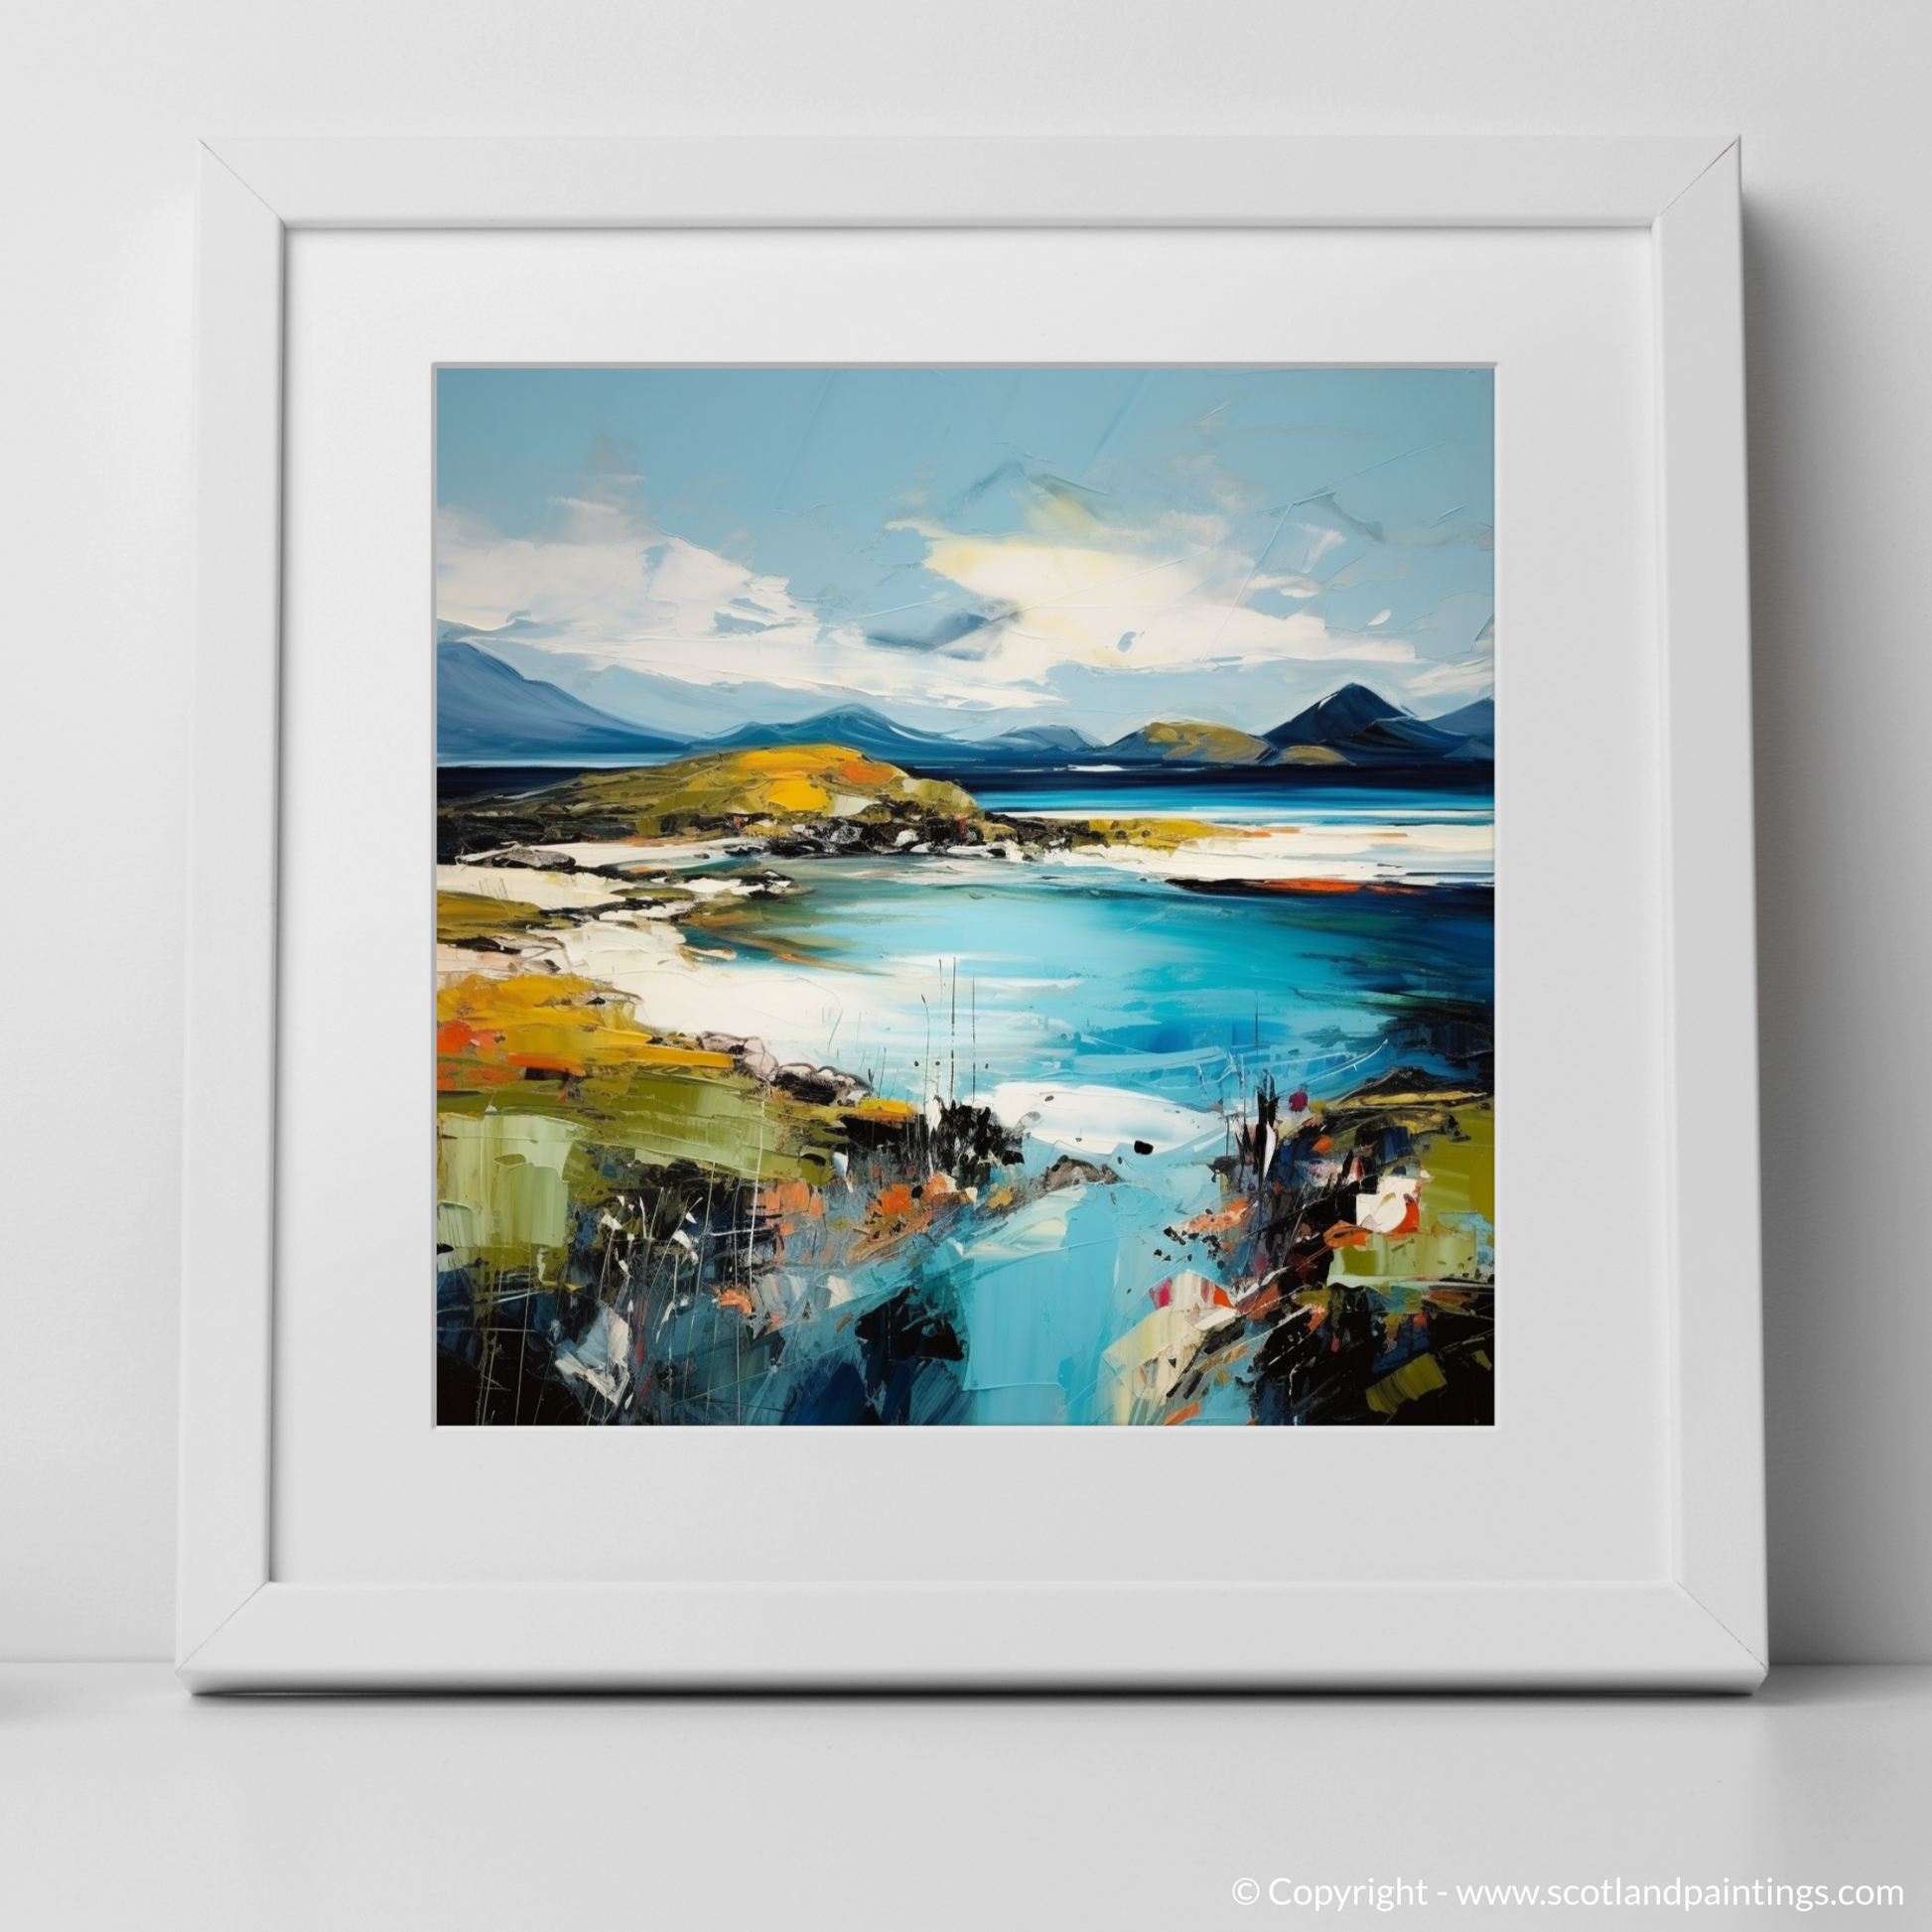 Art Print of Isle of Barra, Outer Hebrides with a white frame